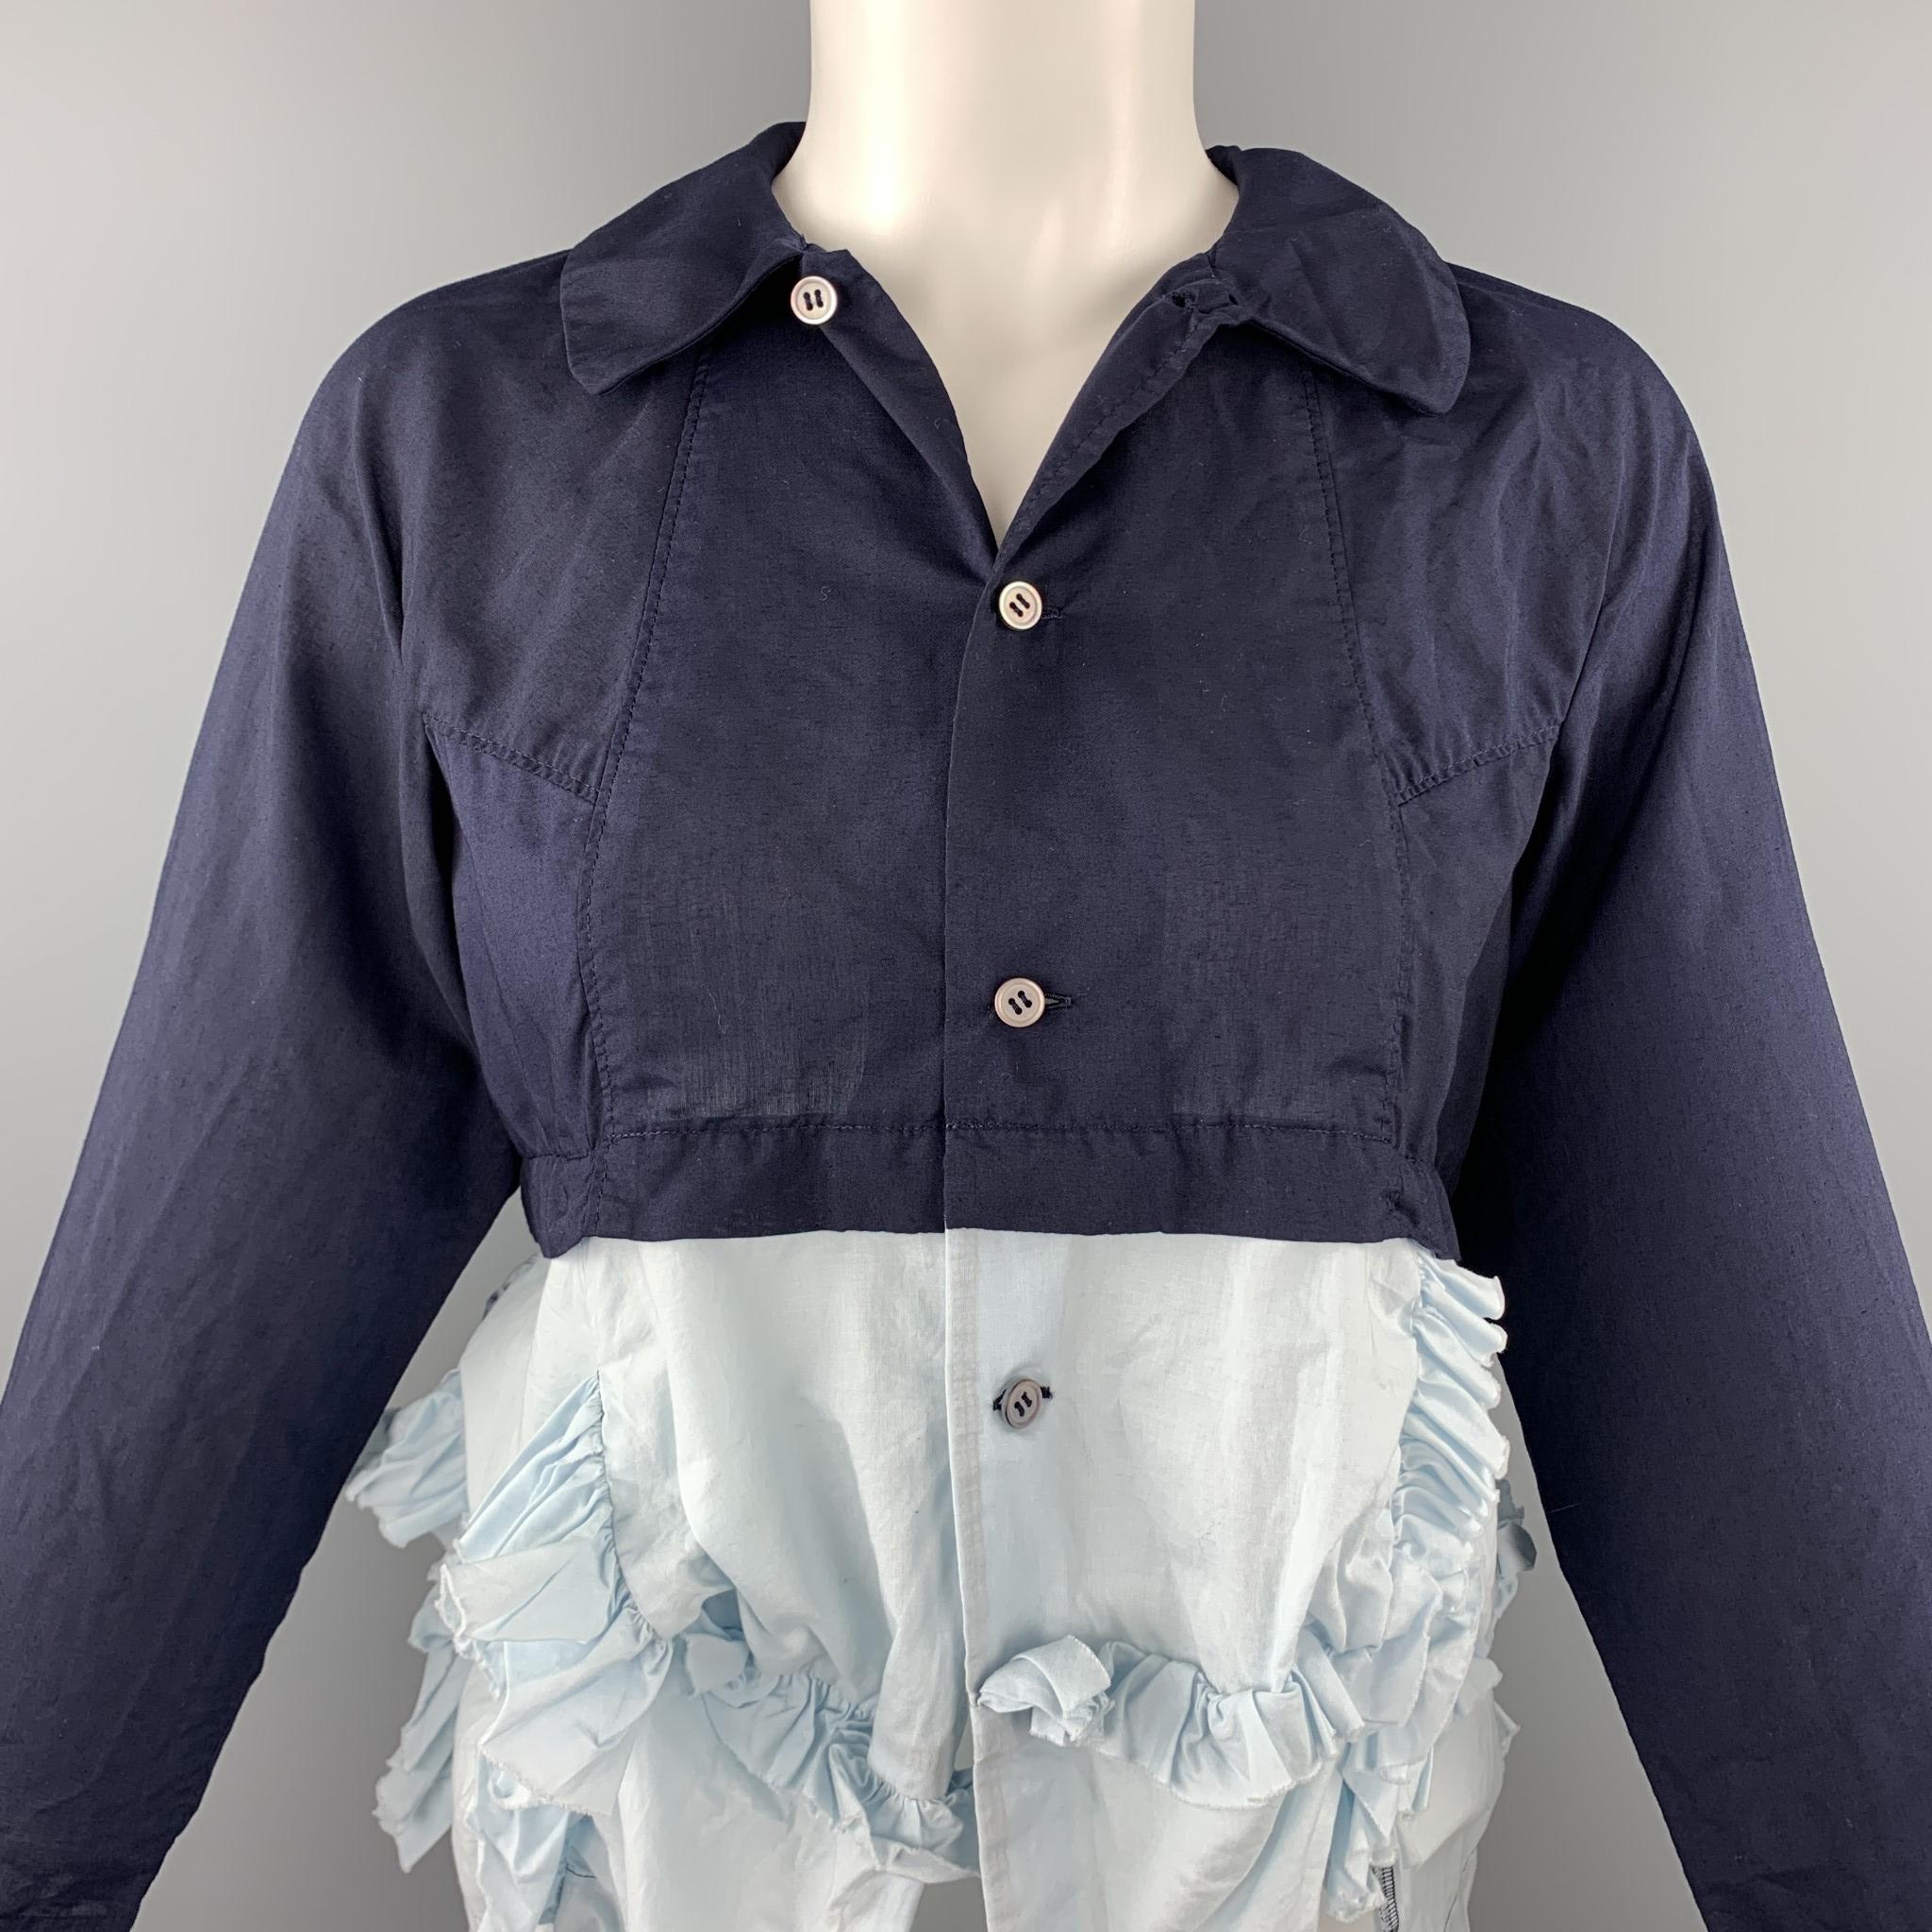 COMME des GARCONS dress top comes in a navy cotton with a light blue ruffled design featuring a button up style and a spread collar. Made in Japan.

Very Good Pre-Owned Condition.
Marked: XS / AD 2015

Measurements:

Shoulder: 17 in. 
Bust: 34